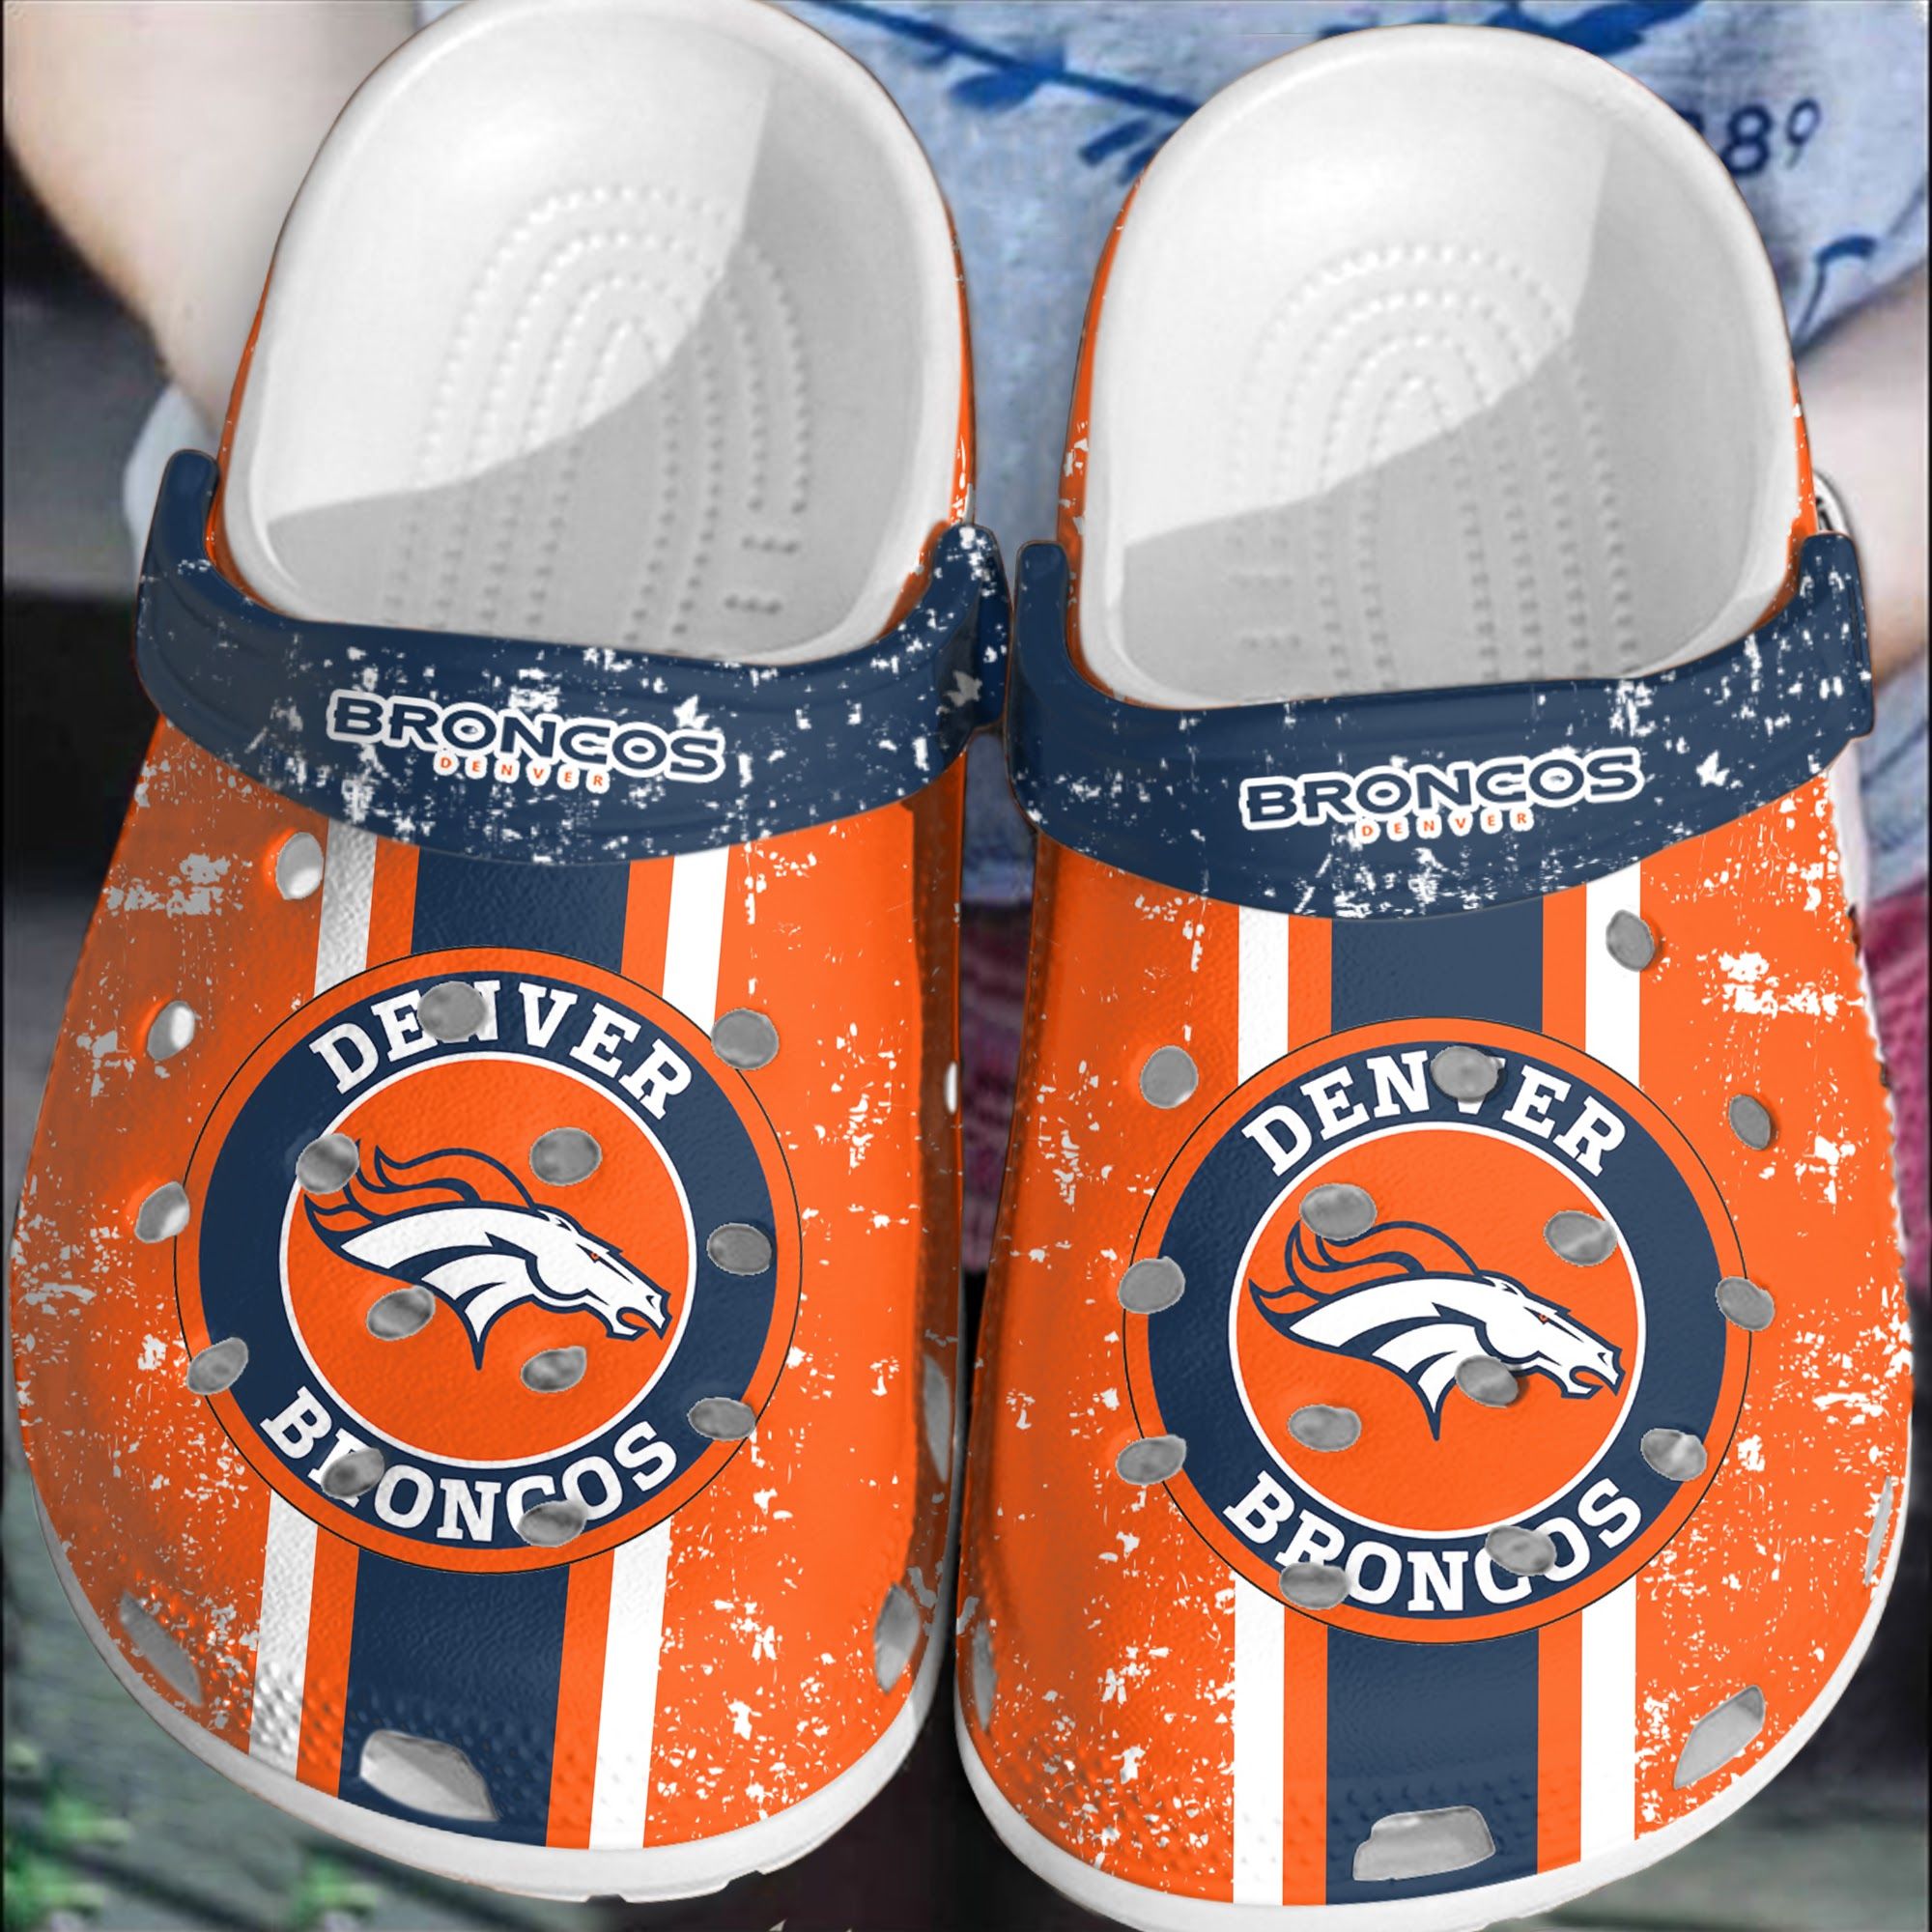 If you'd like to purchase a pair of Crocband Clogs, be sure to check out the official website. 67